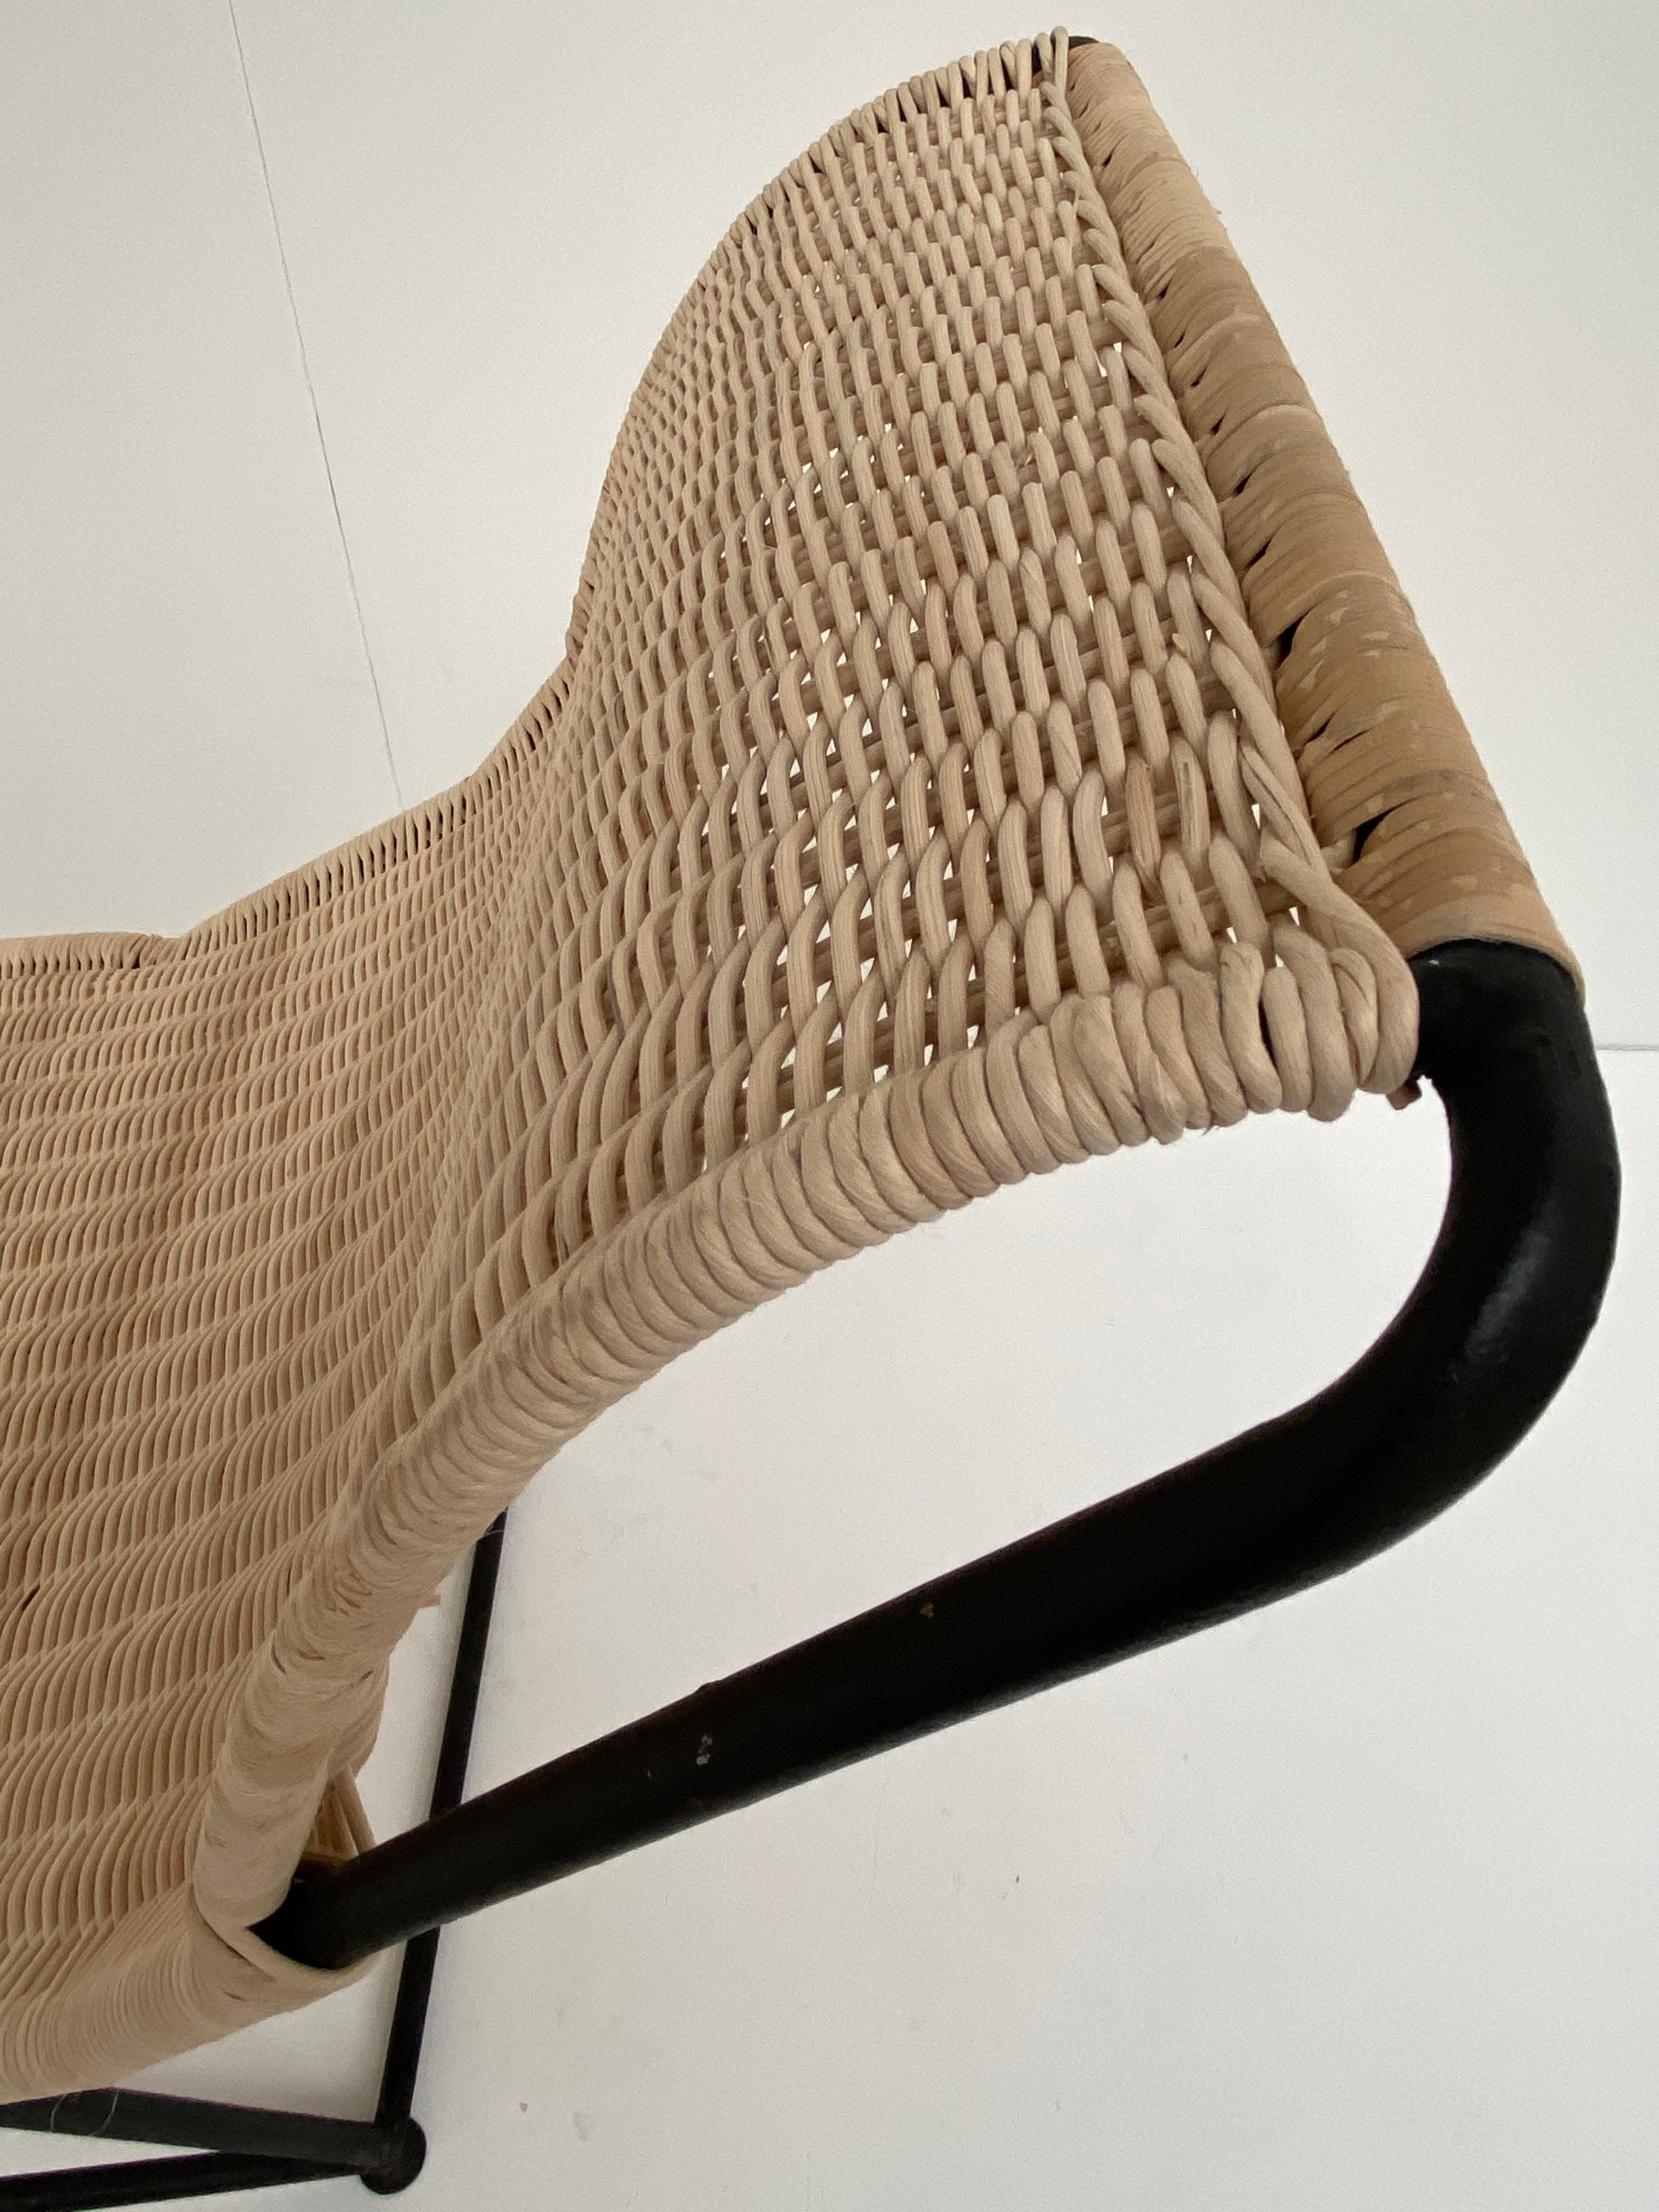 Mid-20th Century Stunning Sculptural Form Wicker Chaise Attributed to Raoul Guys, France, 1950's For Sale